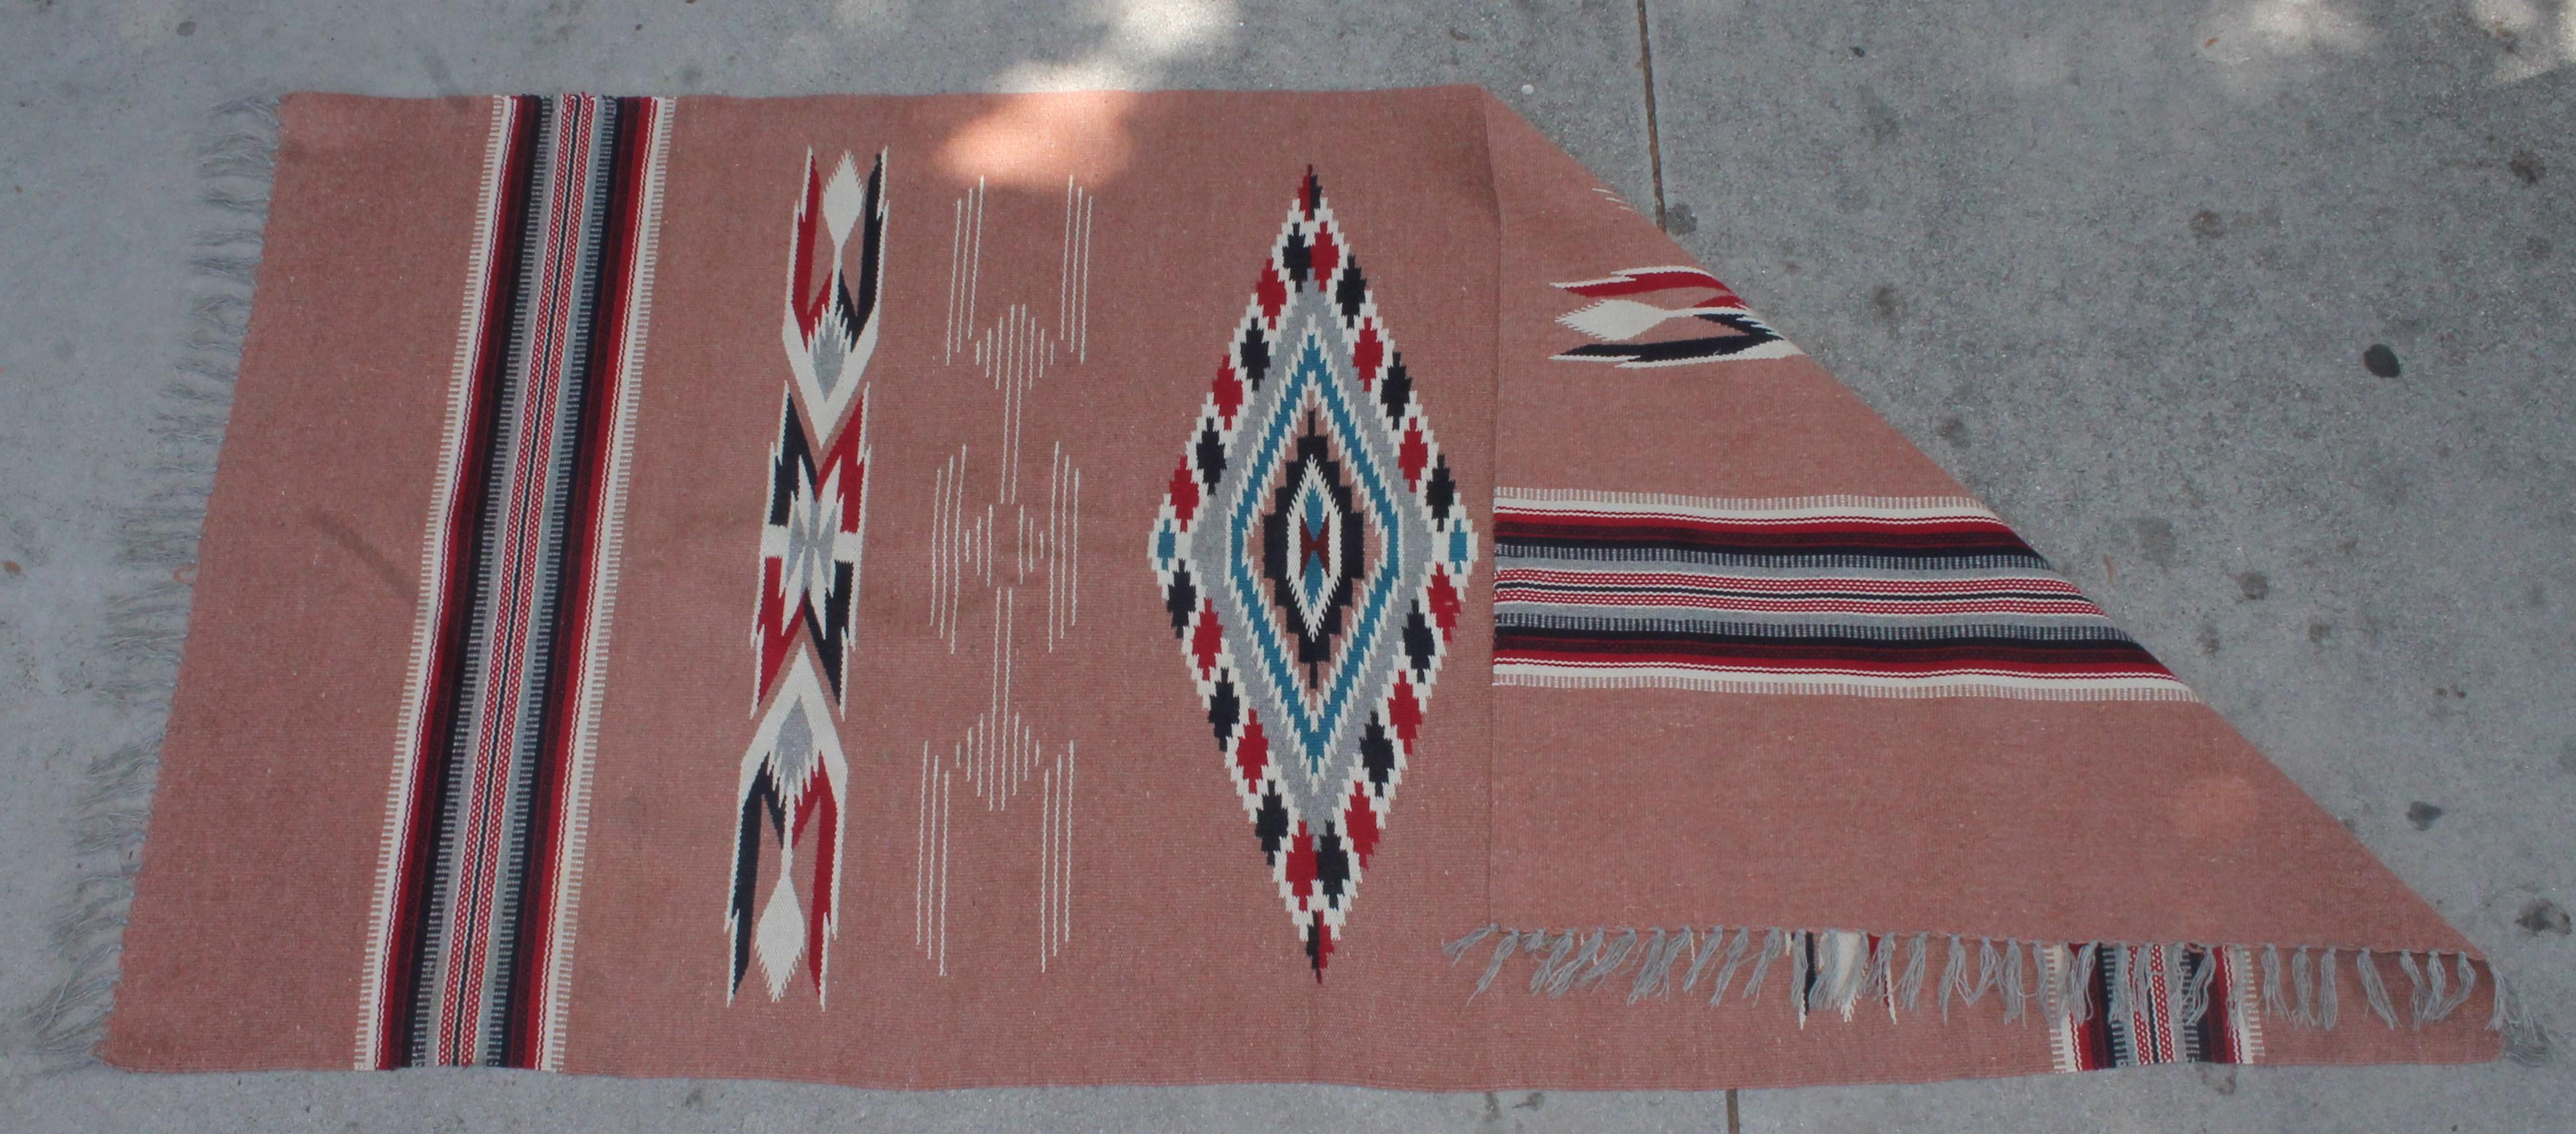 This fine Mexican weaving is in pristine condition and retains the original fringe. It’s a wonderful salmon color withe the seeing eye pattern in the middle of the weaving.